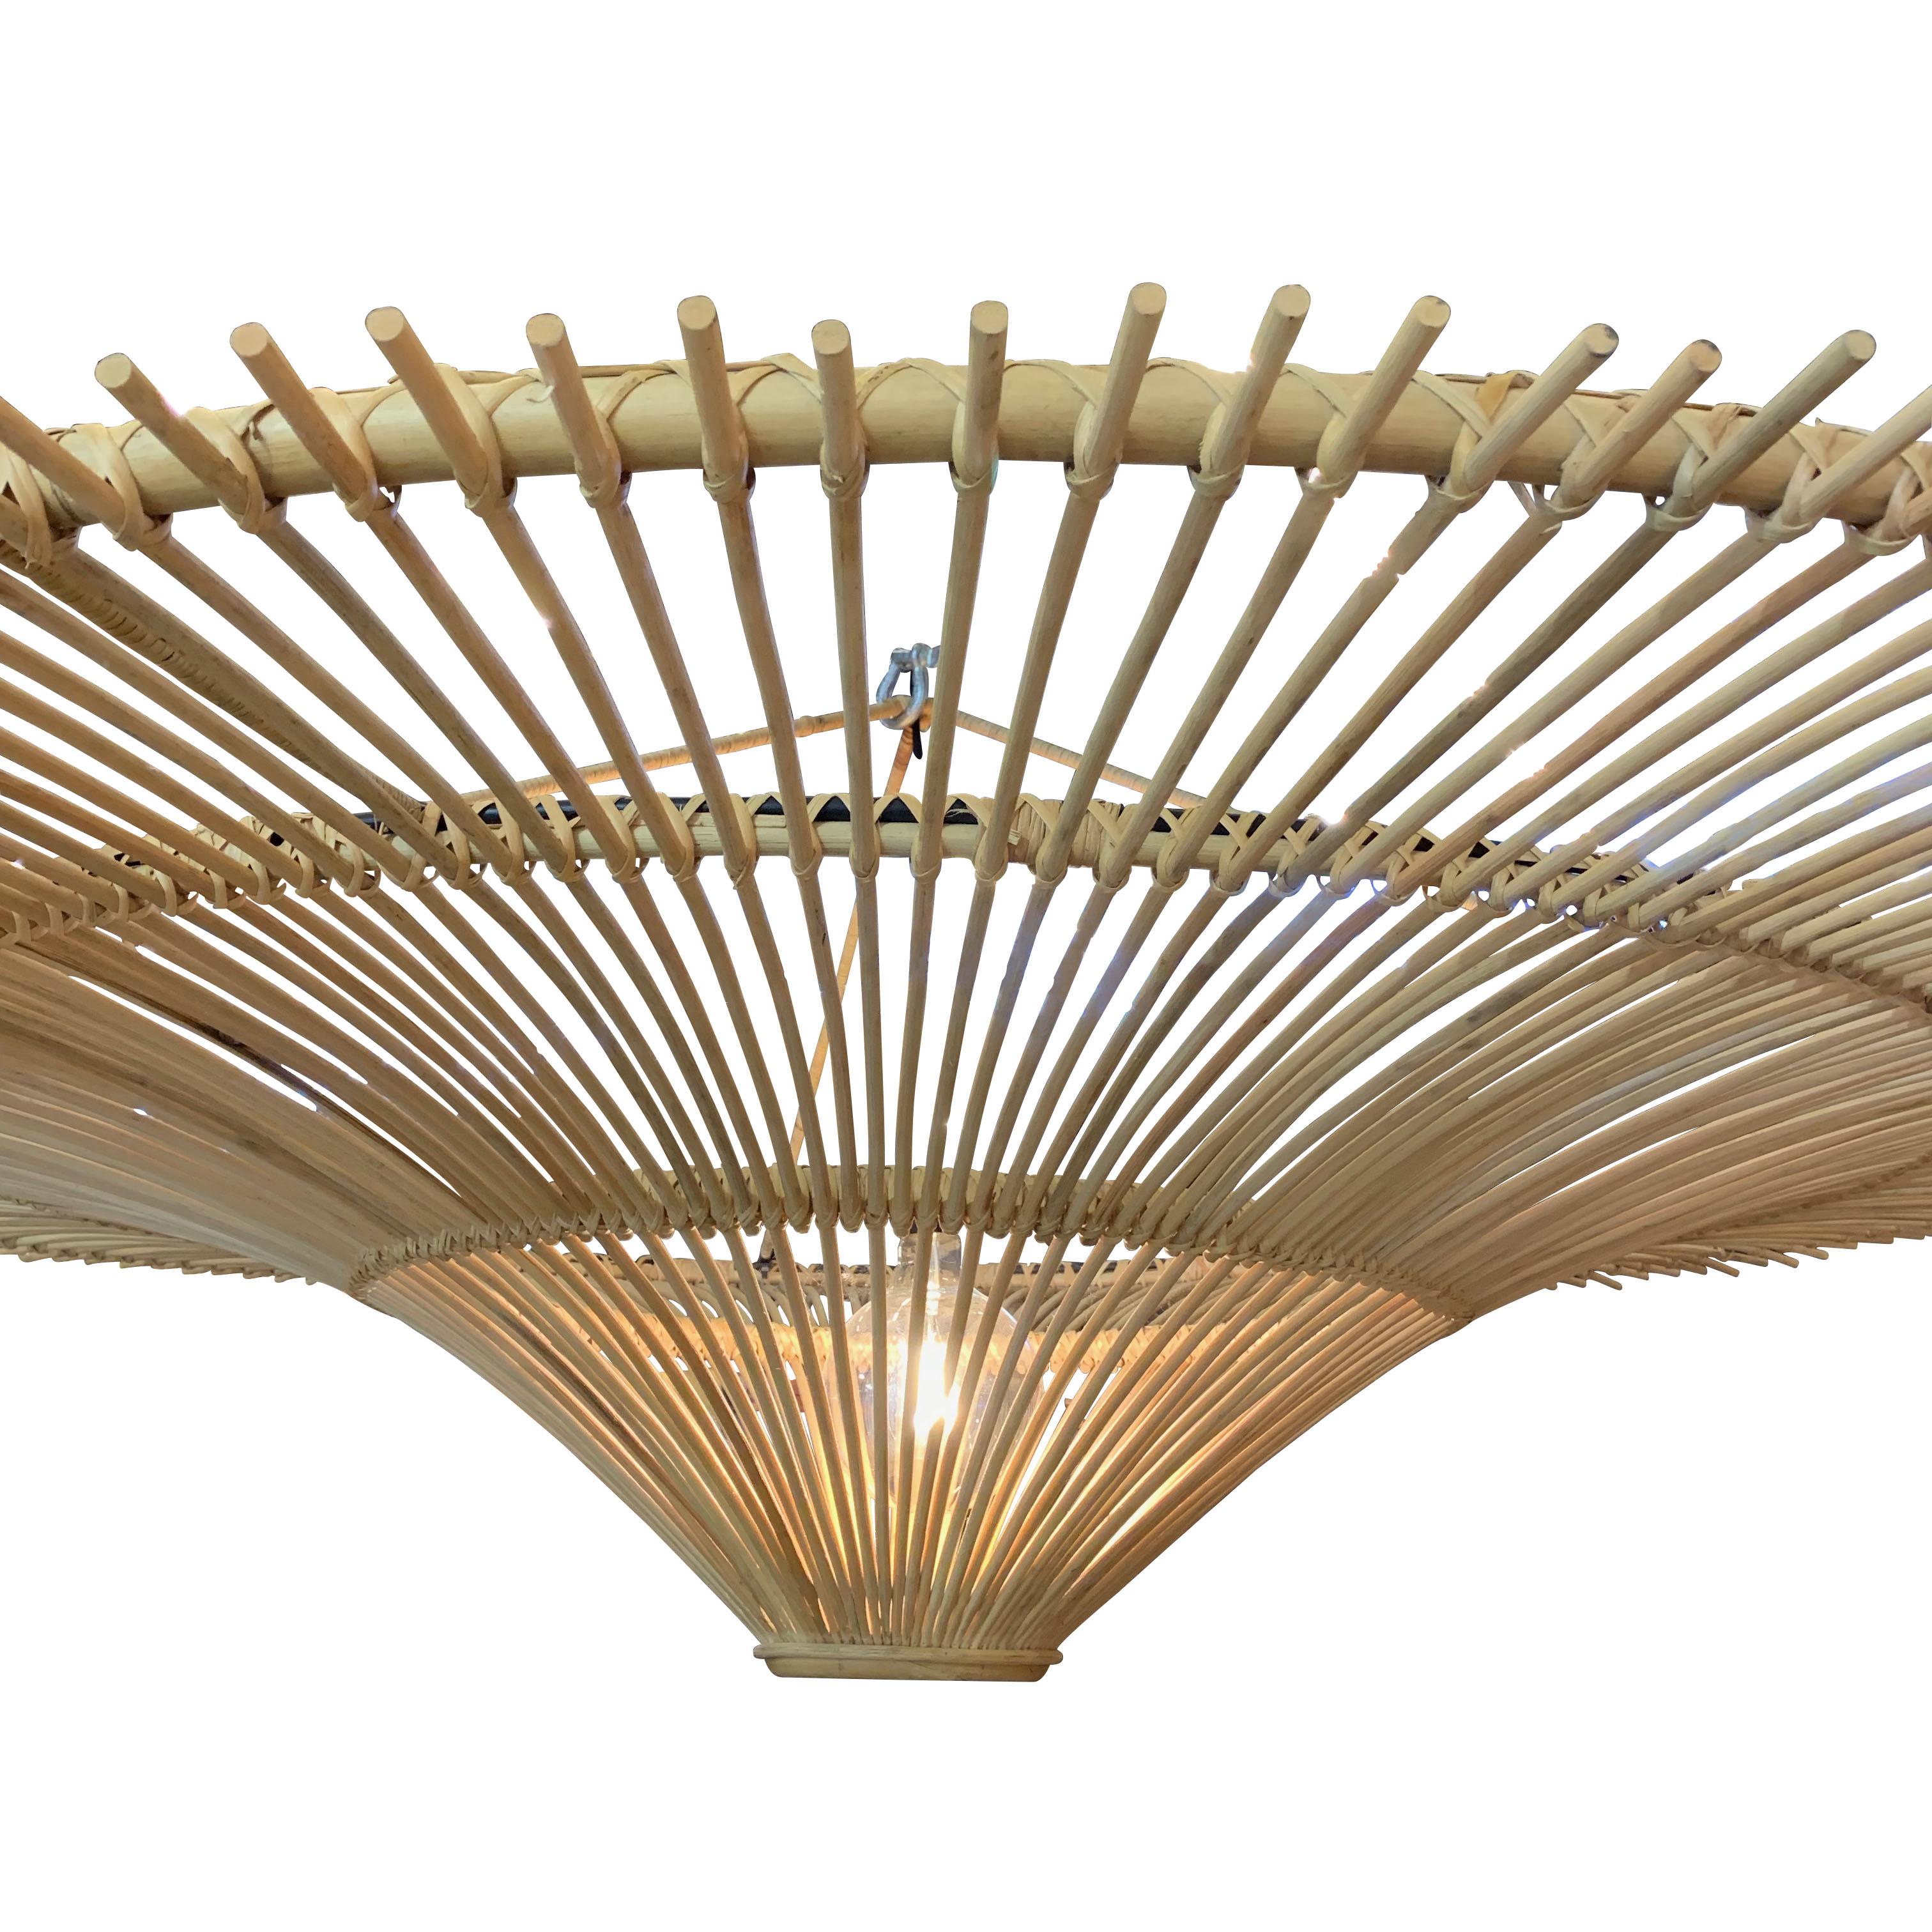 Contemporary Indonesian medium size round umbrella shaped chandelier made of bamboo.
Single bulb.
60watt to 100 watt maximum
Also available in large 71